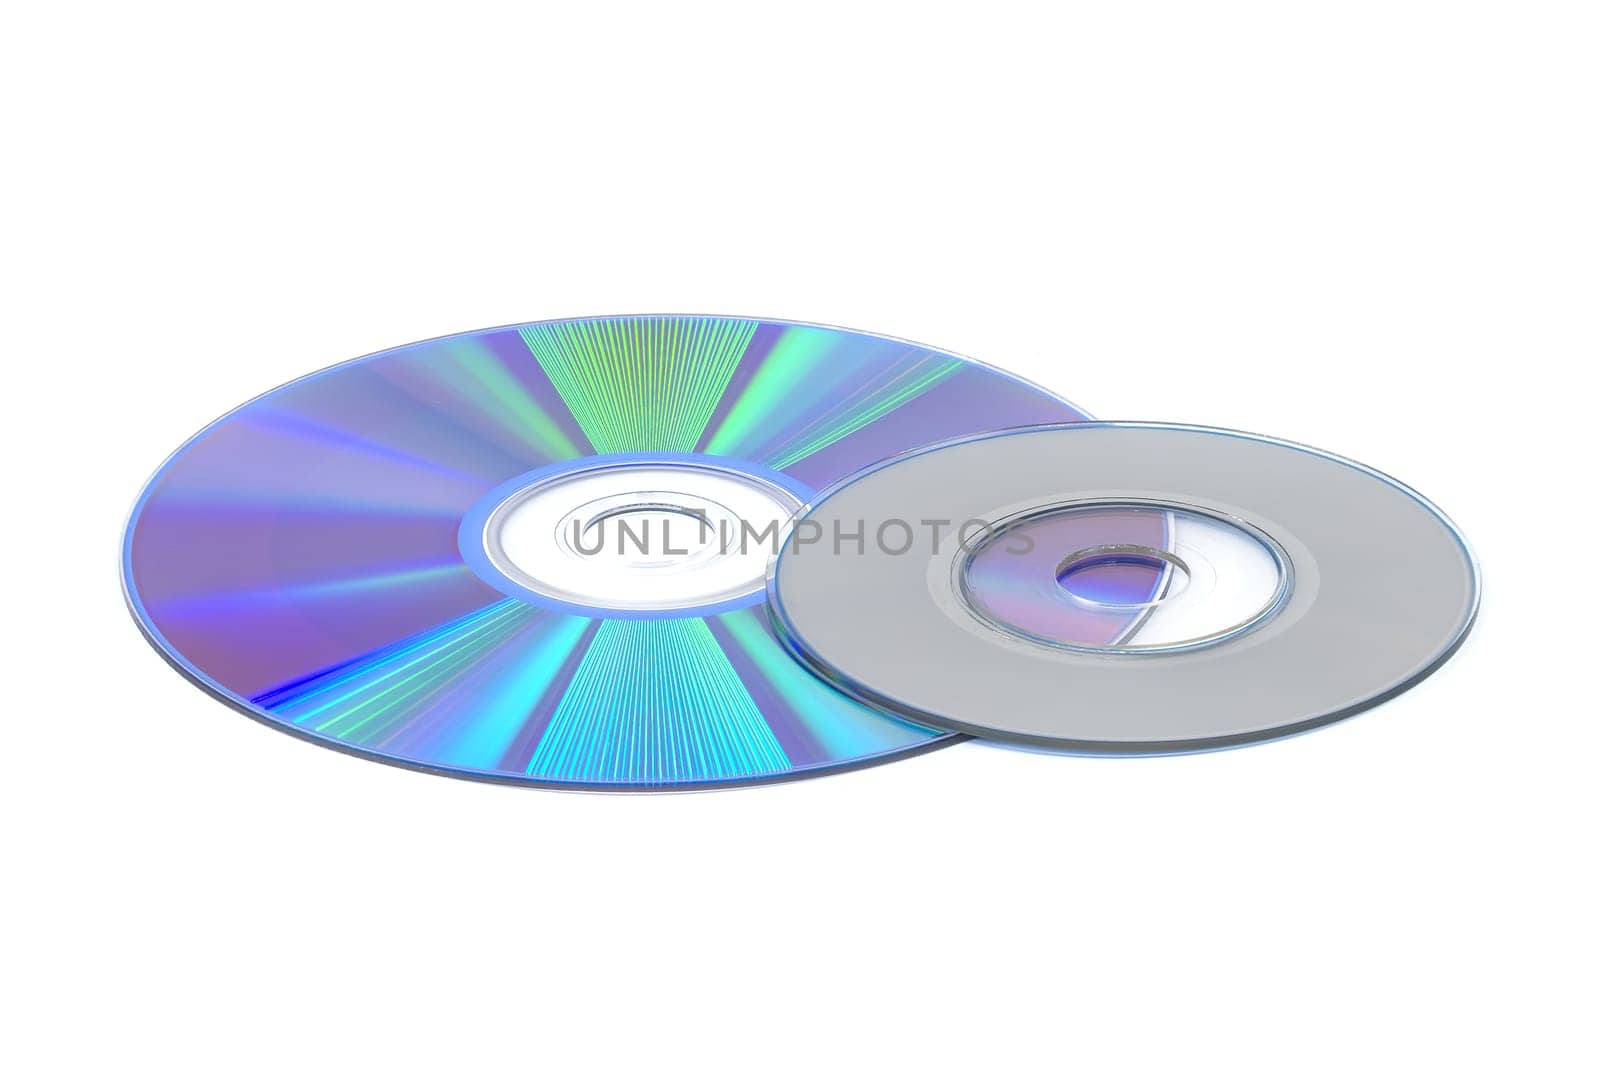 Close up of a CD positioned flat on a plain white background. The CD's reflective surface showcasing the intricate spiral track pattern that represents data storage